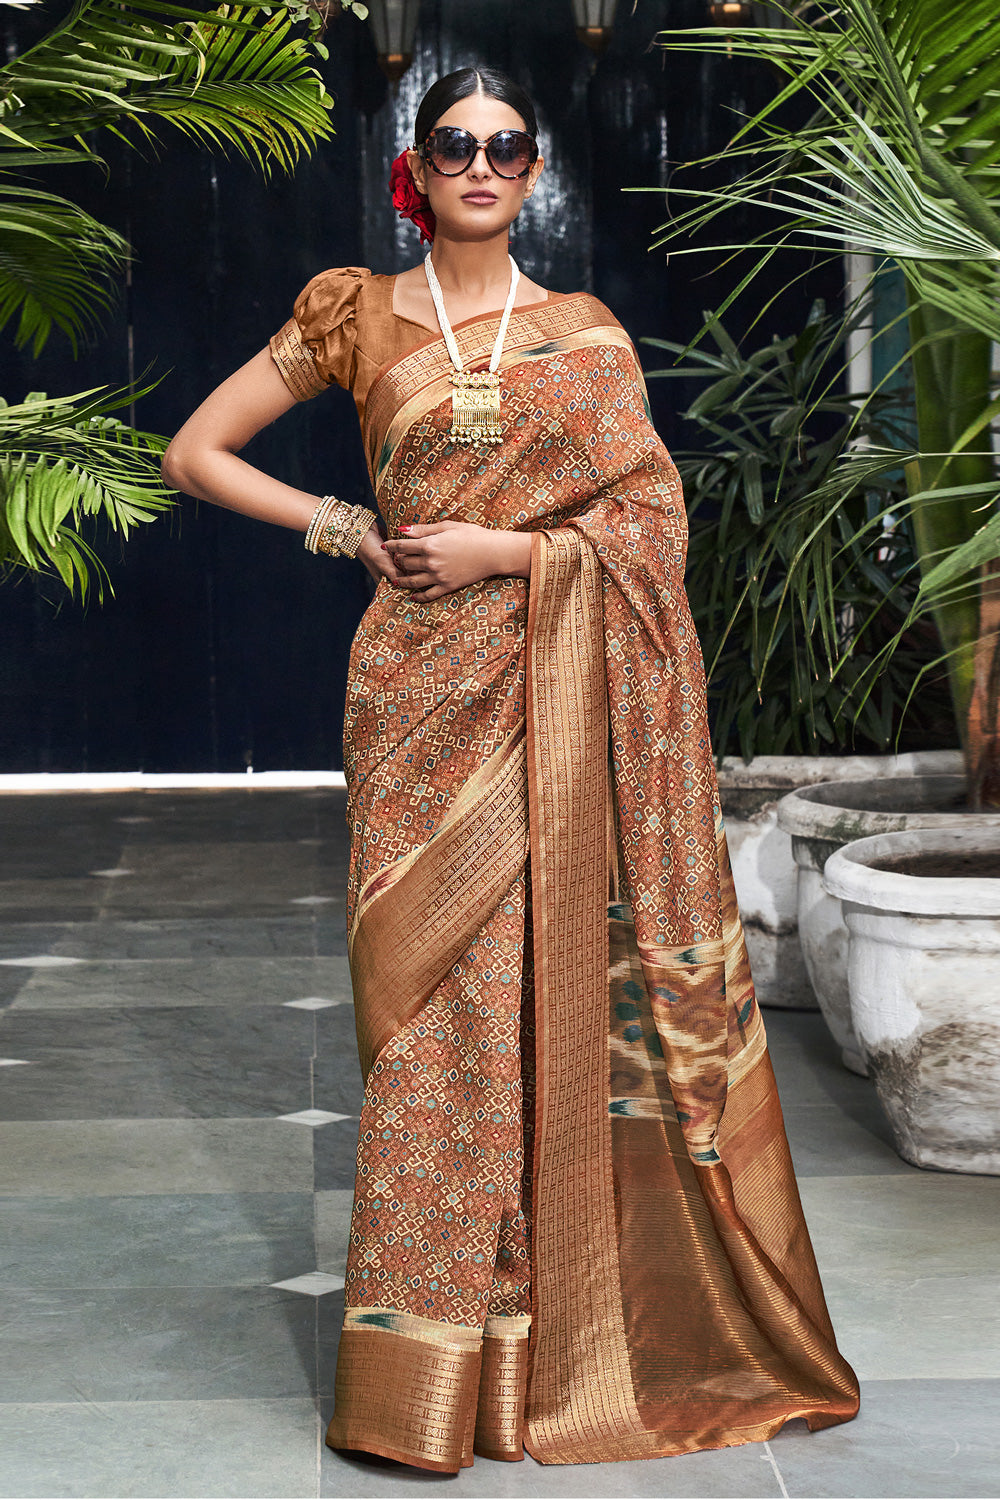 Shop Latest Bandhej Silk Saree For Online In India | Me99